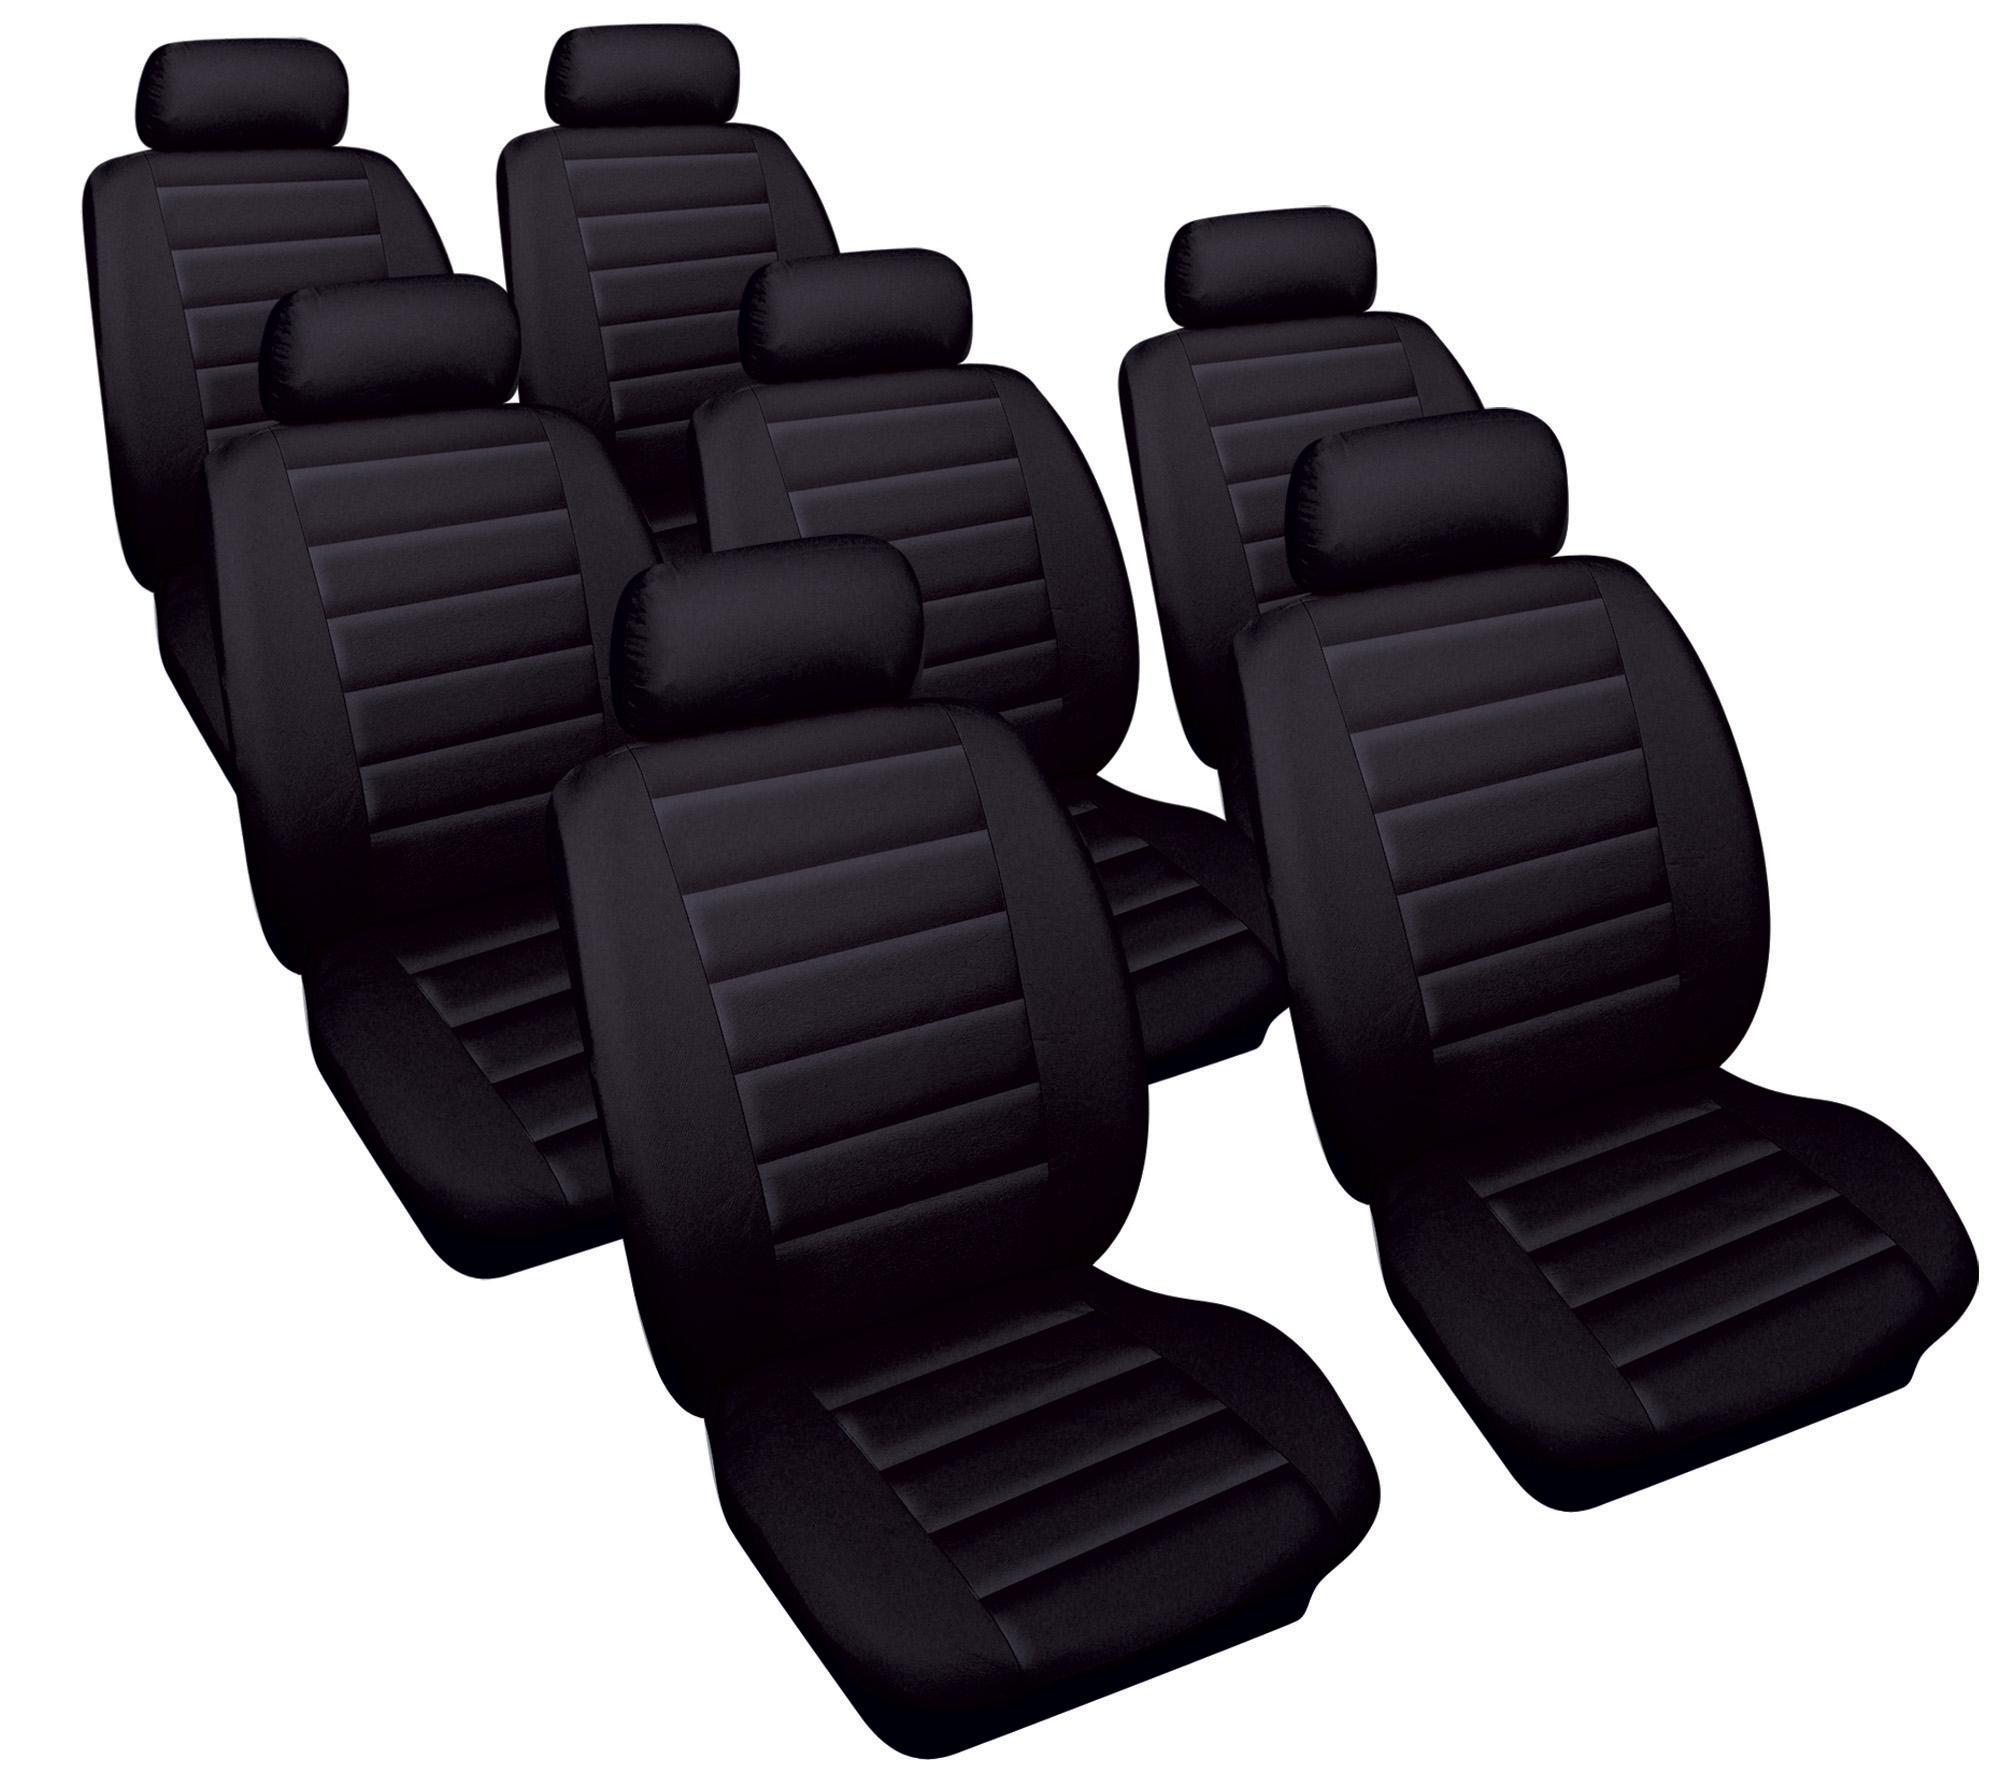 toyota previa leather seat covers #3